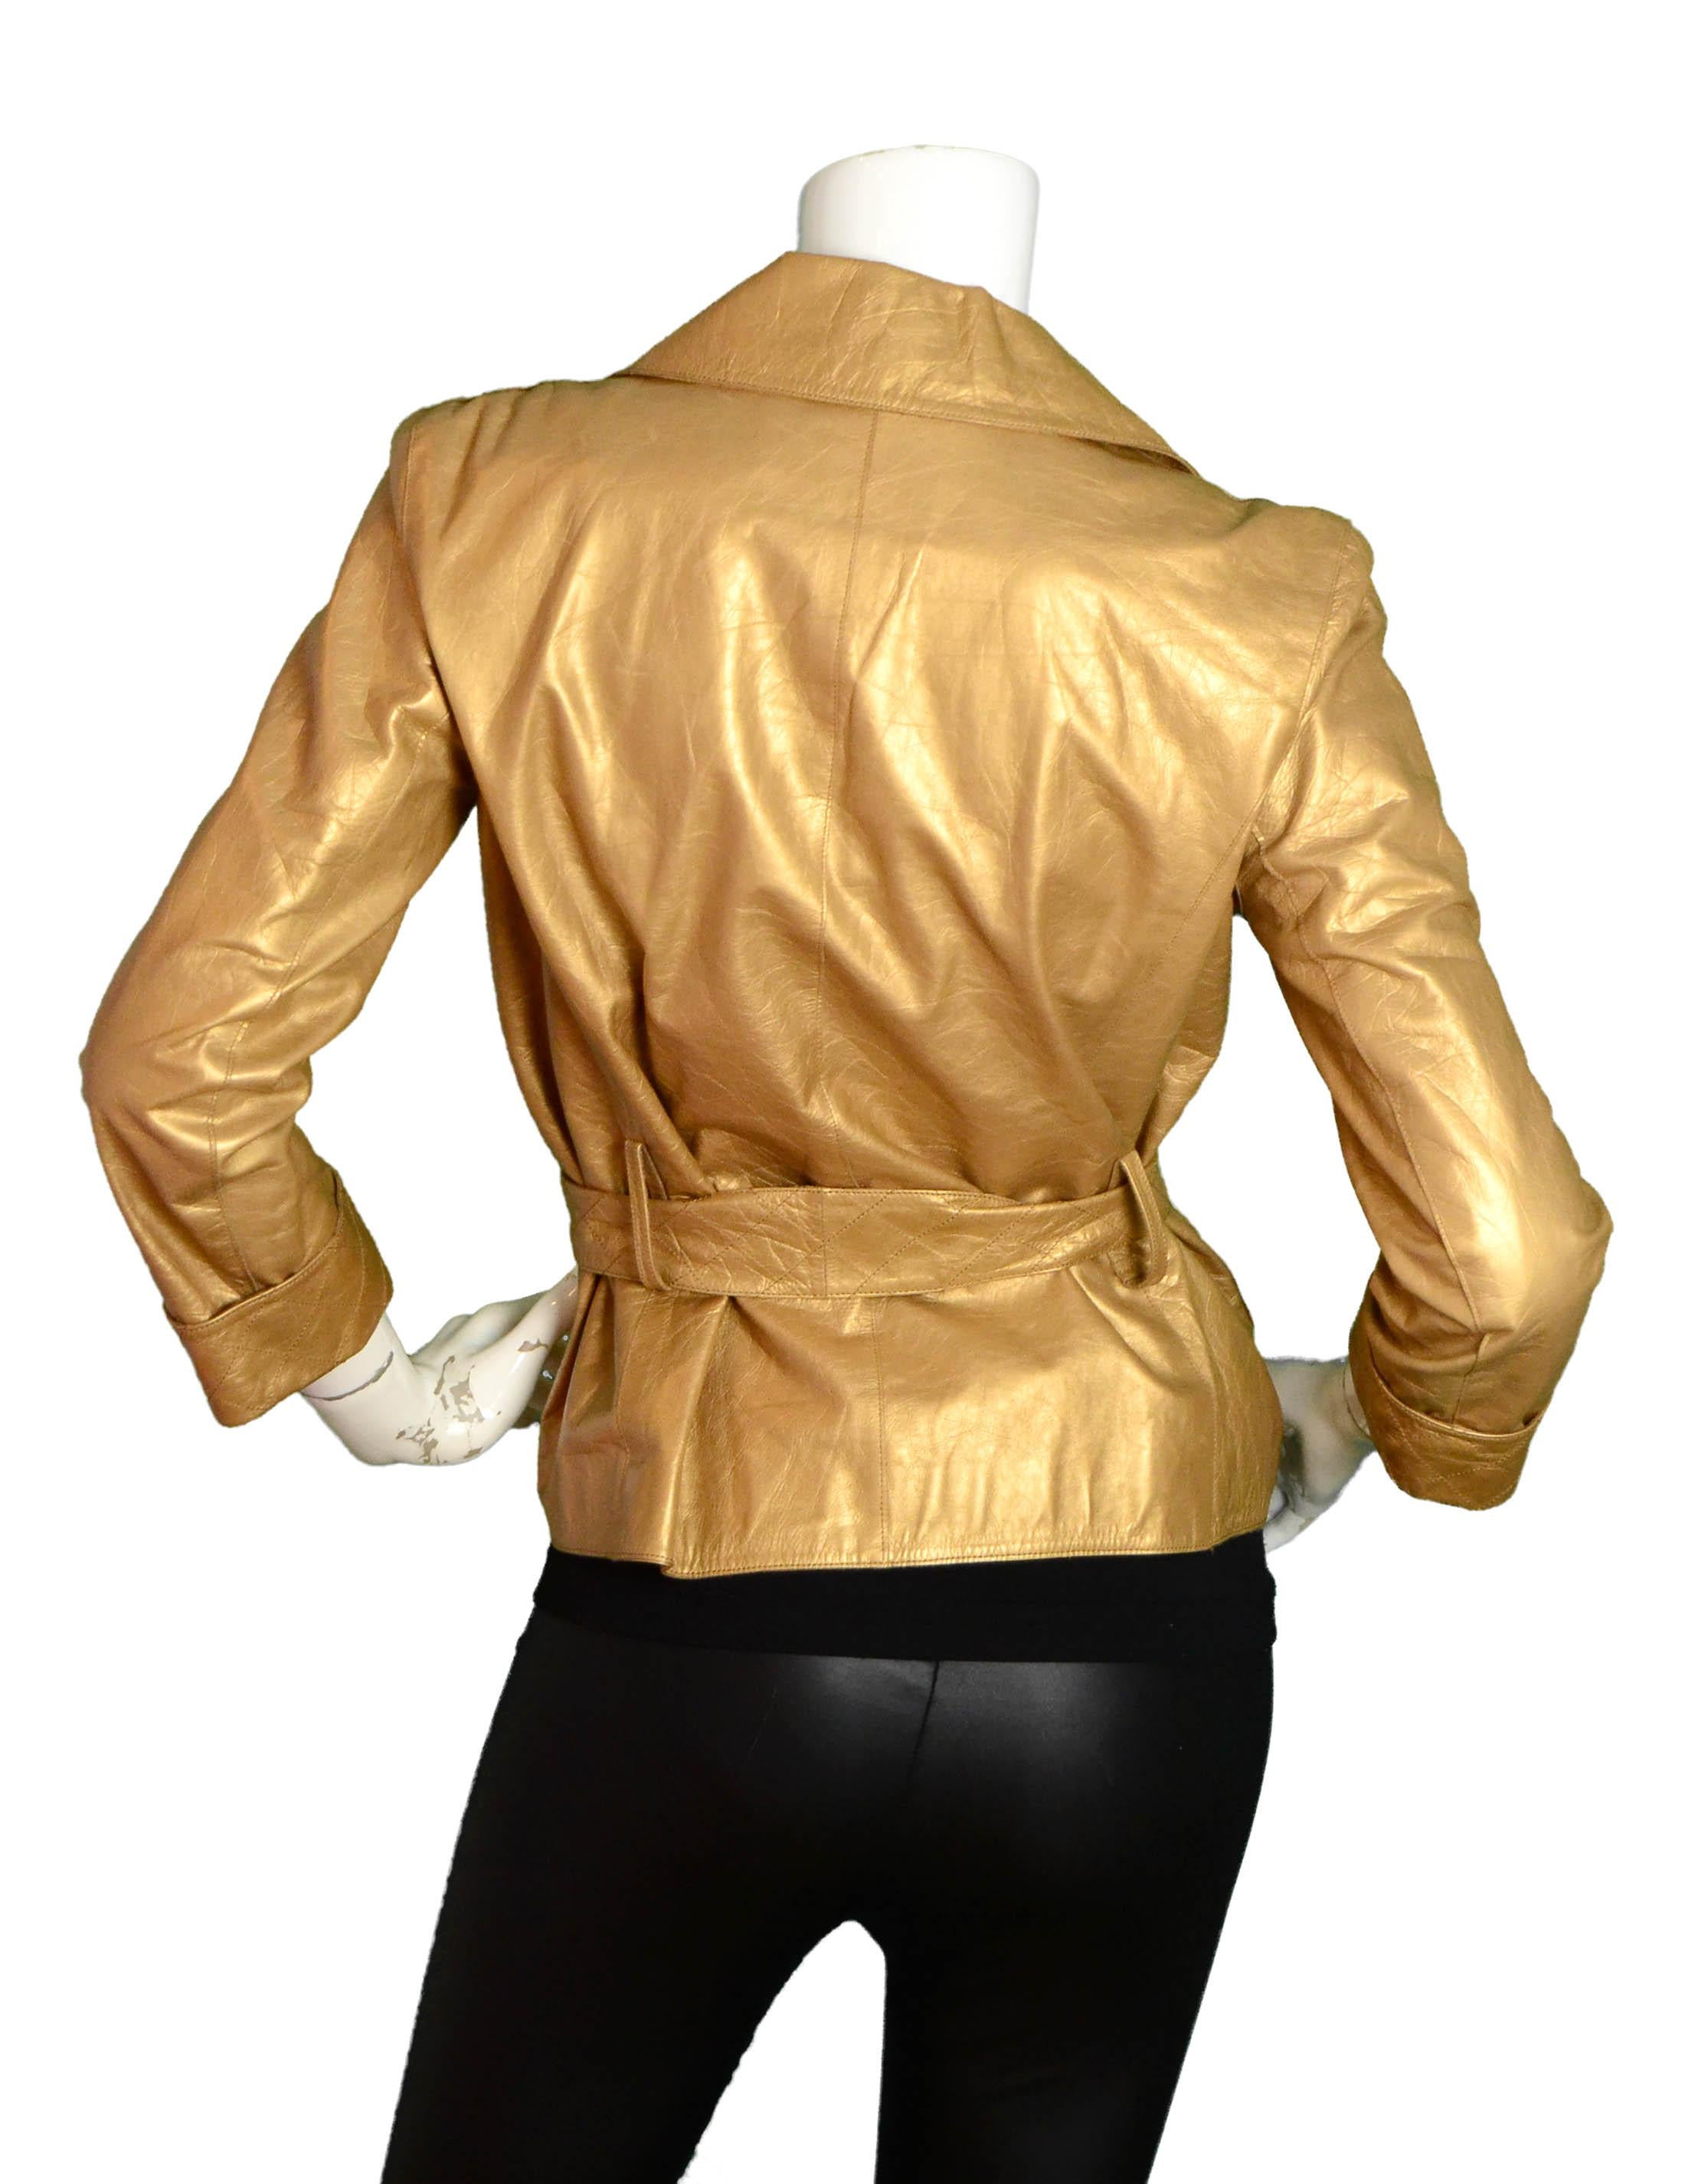 Chanel 06P Gold Leather Single Button Jacket w/Belt

Made In: France
Year of Production: 06P
Color: Gold
Materials: 100% Calfskin leather
Lining: 100% Silk
Opening/Closure: Button
Overall Condition: Very Good - two stains on collar (see